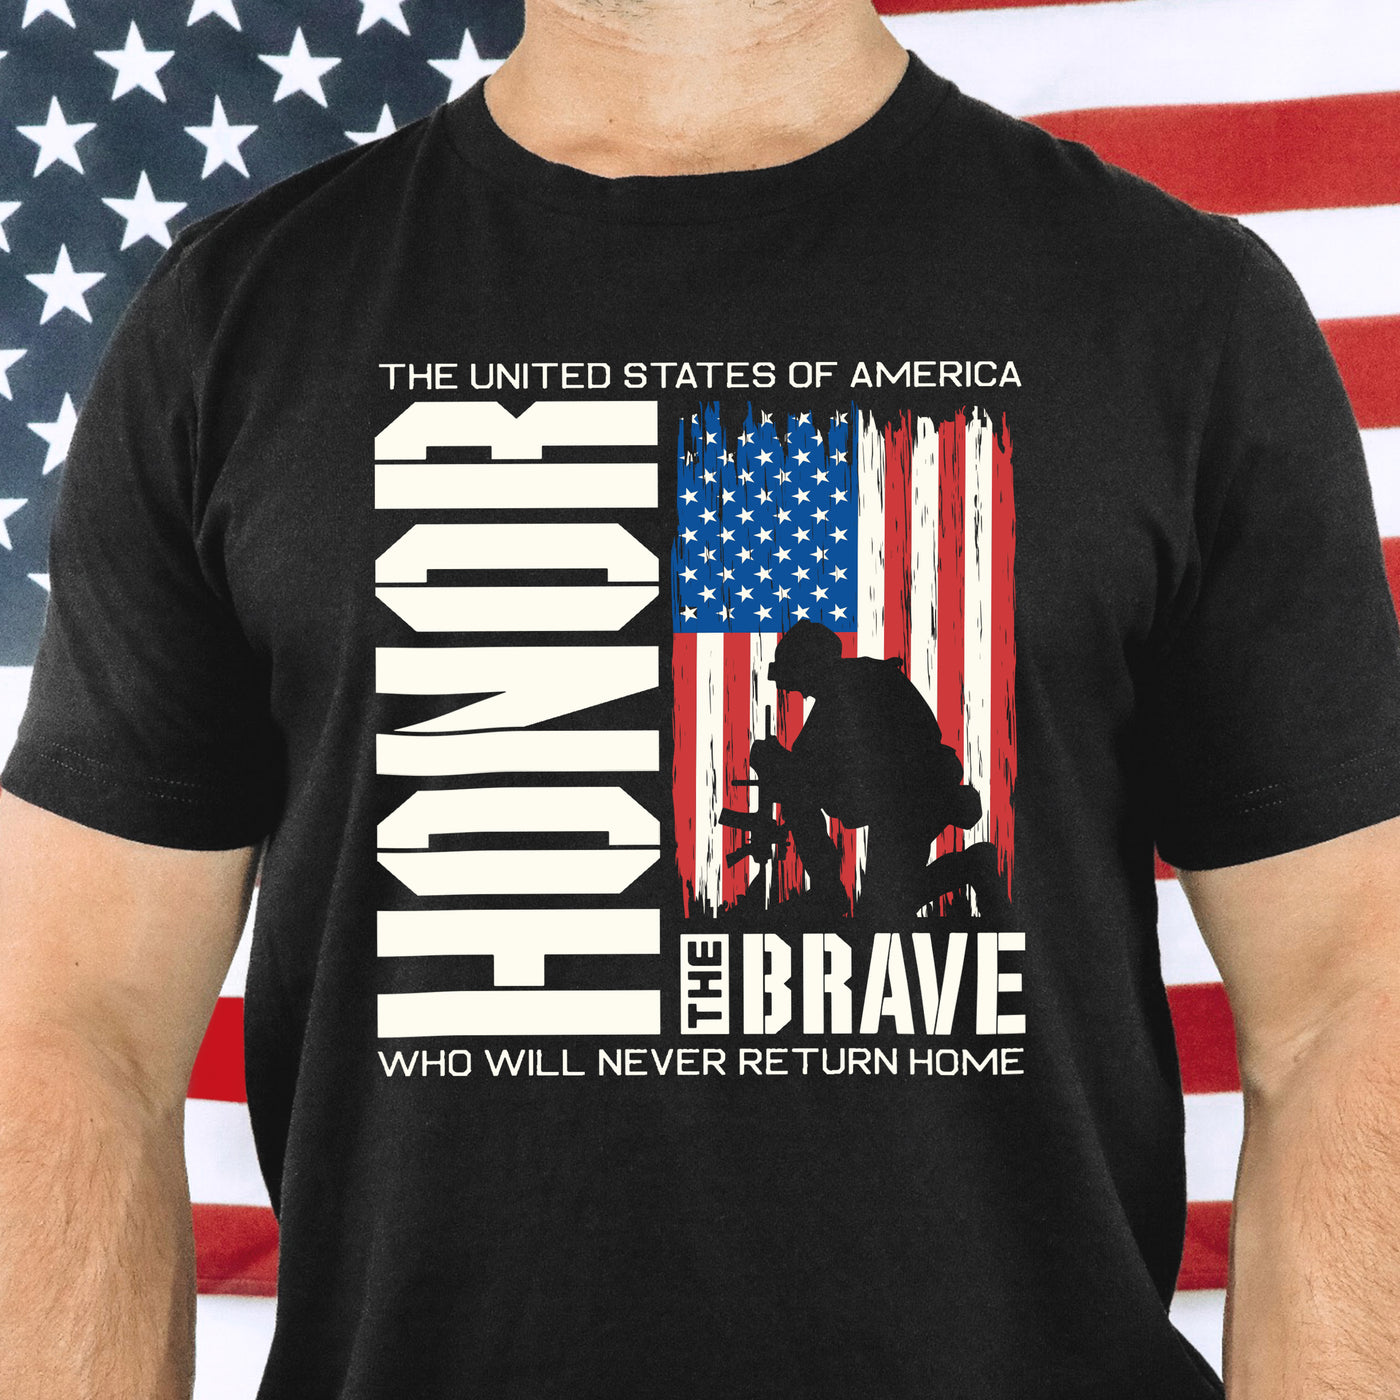 Honor the Brave T-Shirt